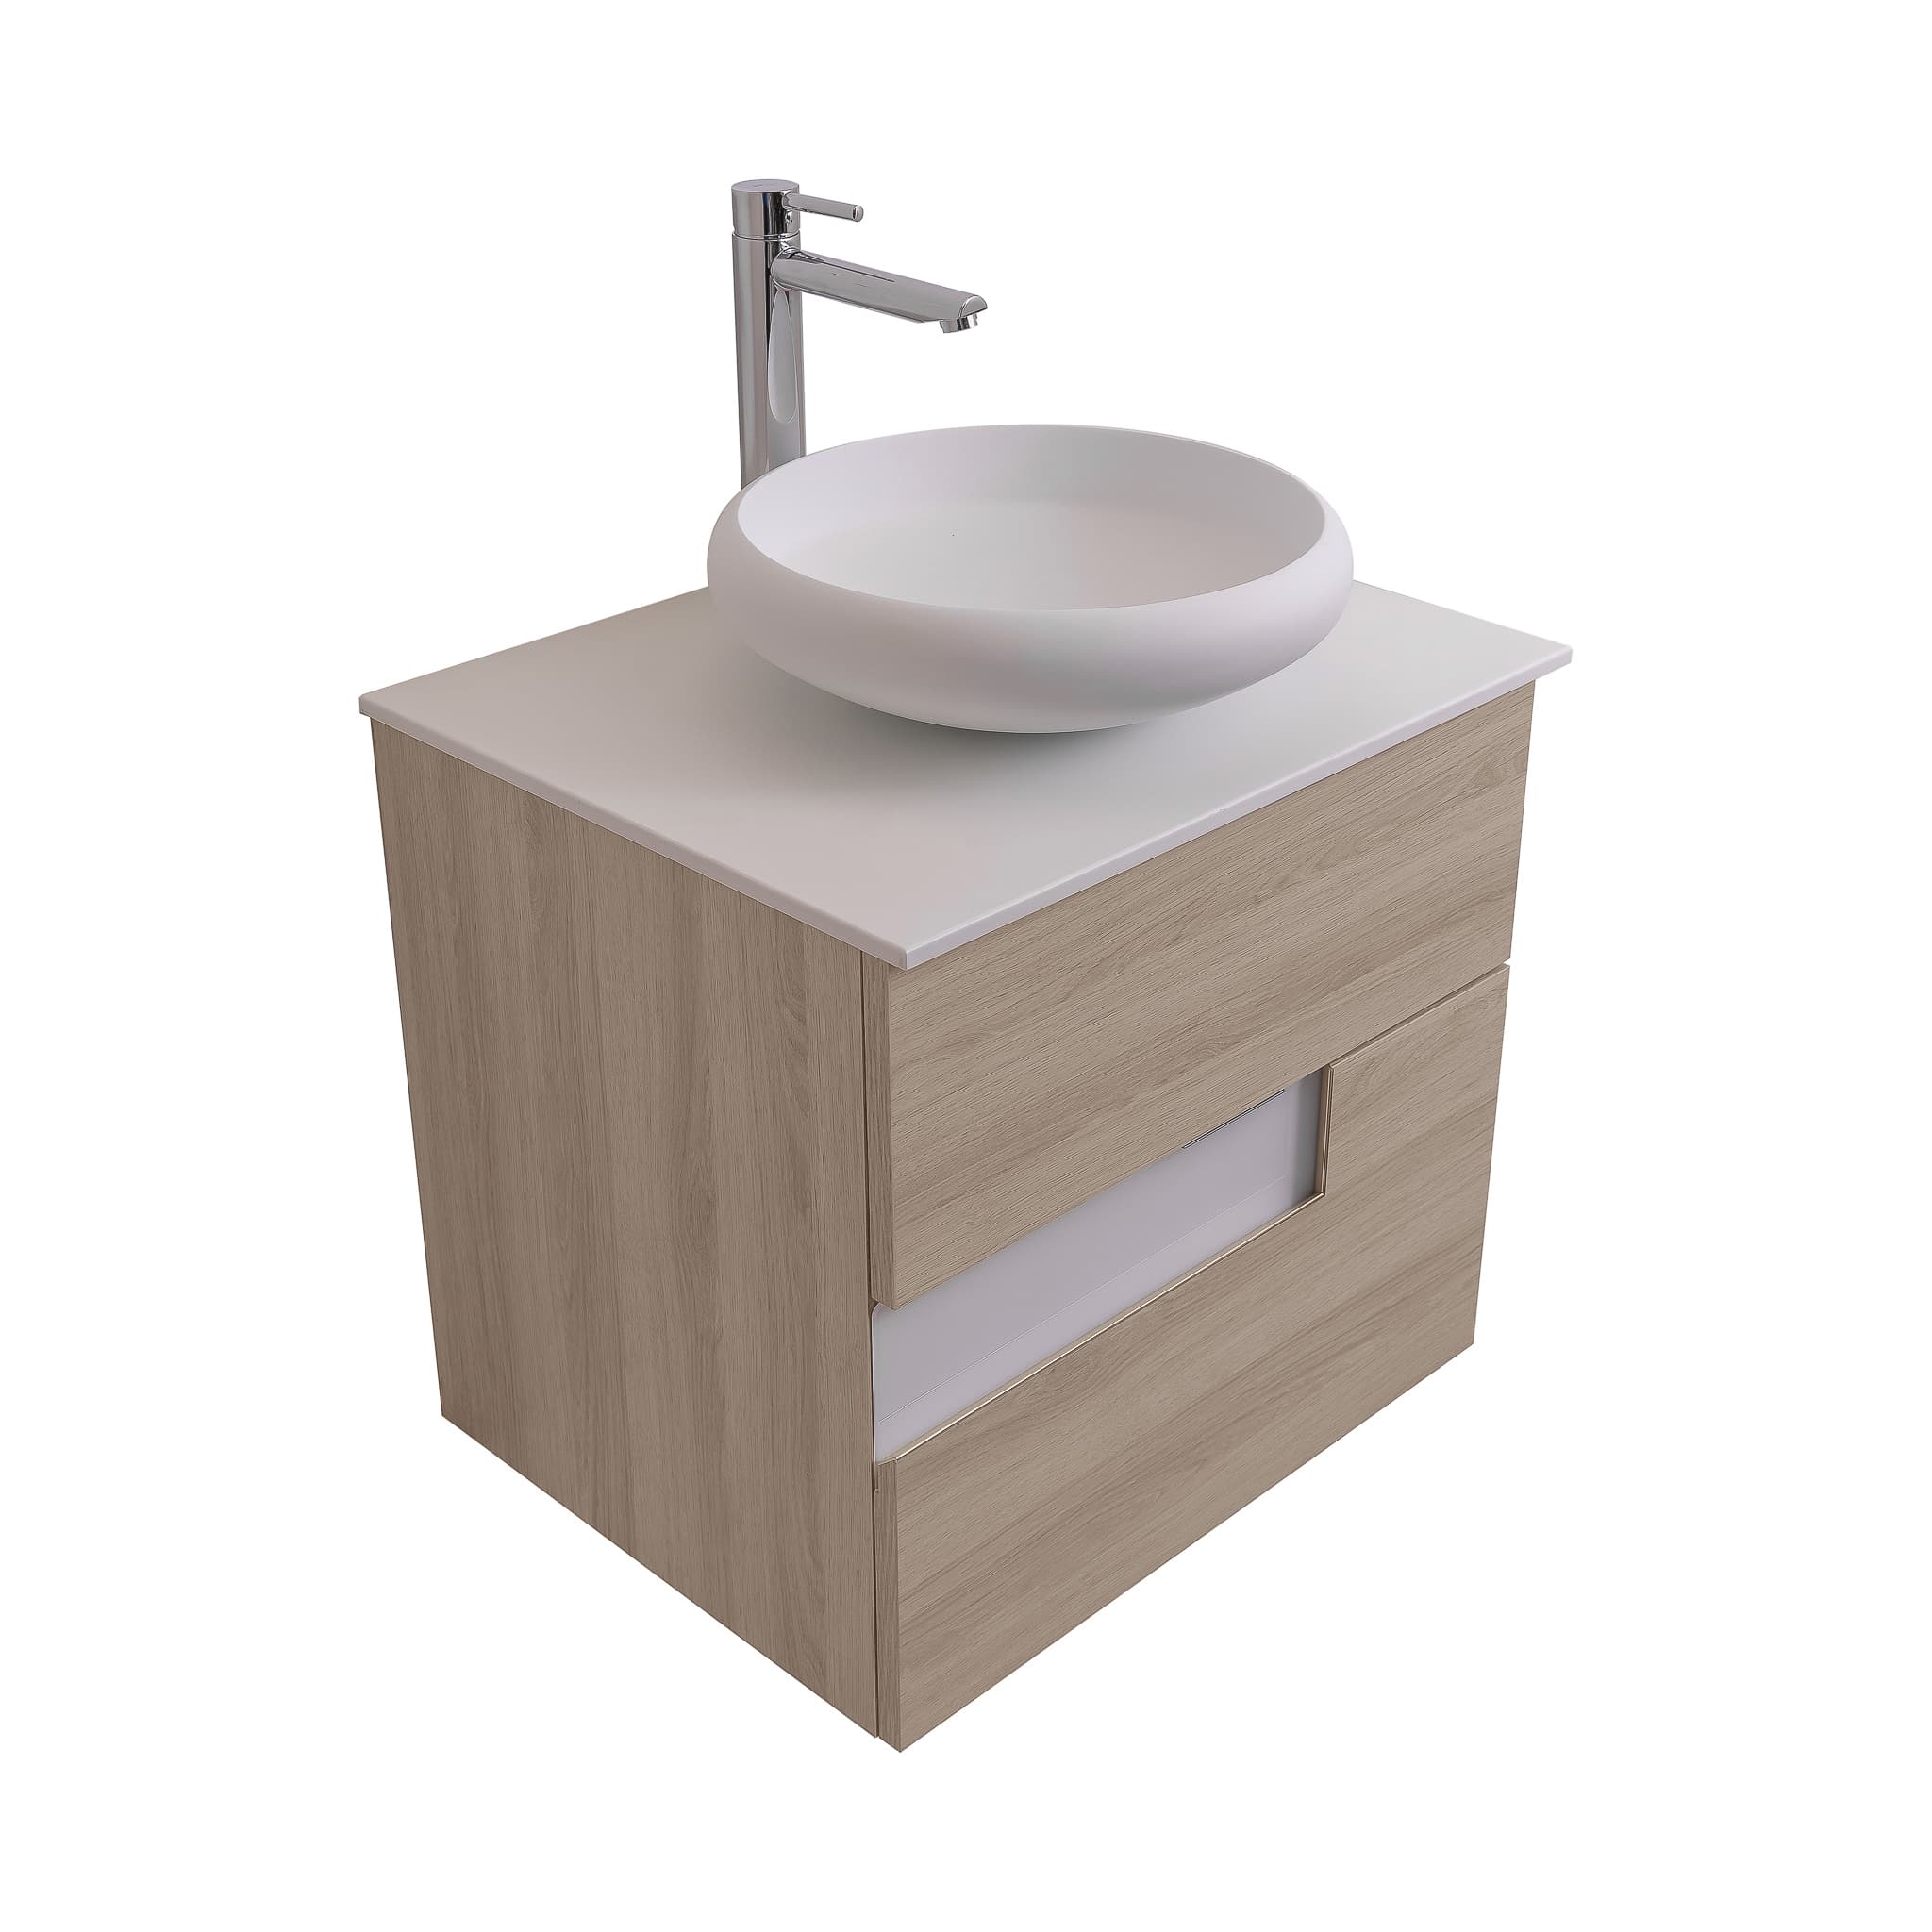 Vision 23.5 Natural Light Wood Cabinet, Solid Surface Flat White Counter And Round Solid Surface White Basin 1153, Wall Mounted Modern Vanity Set